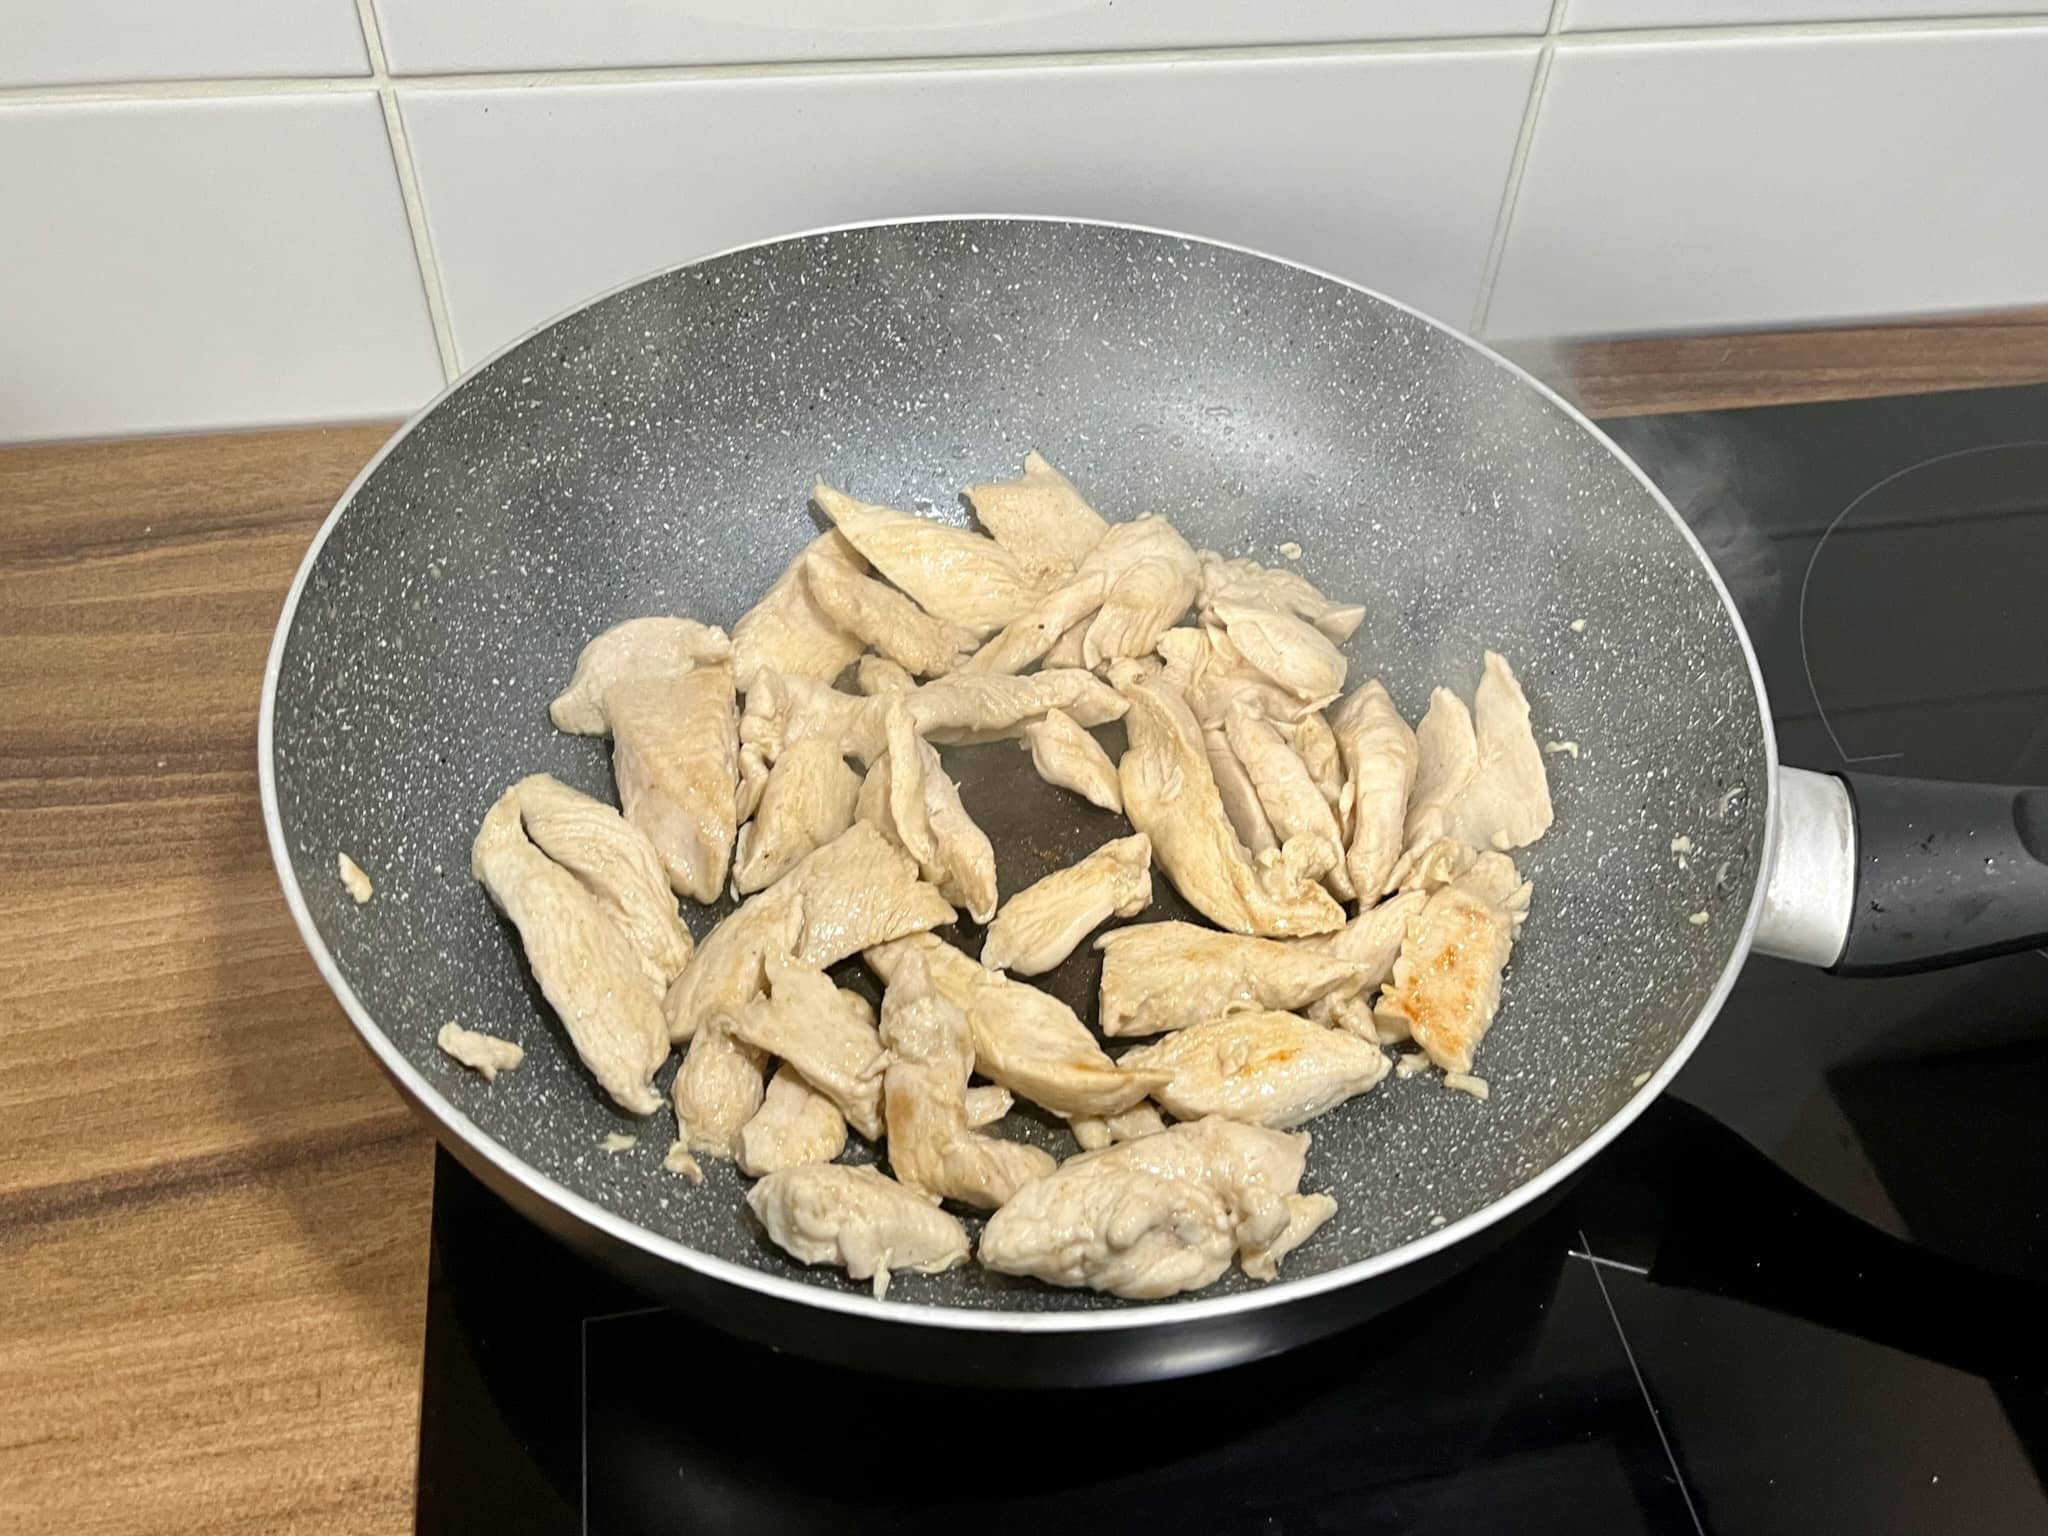 Well-cooked chicken in a pan